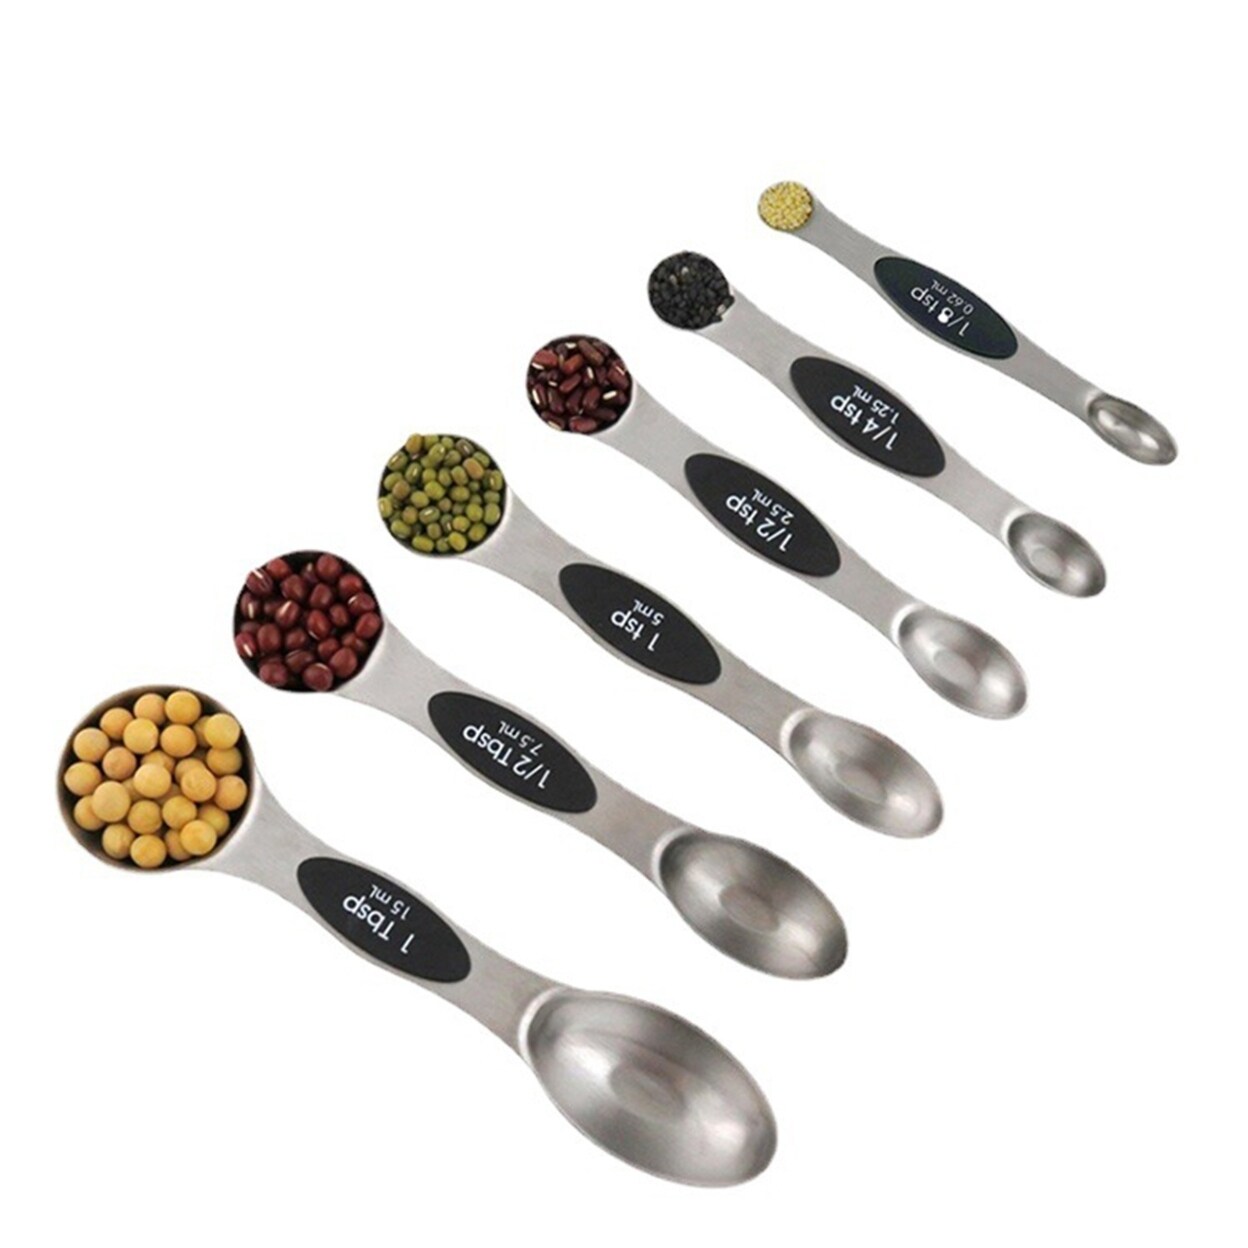 https://ak1.ostkcdn.com/images/products/is/images/direct/6de87c336f24e898aaf4ba04b82349dd6fd0b790/16Pcs-Measuring-Spoons-Food-Grade-Dual-Head-Stainless-Steel-Spice-Powder-Magnetic-Measuring-Scoops-Cups-Set-Kitchen.jpg